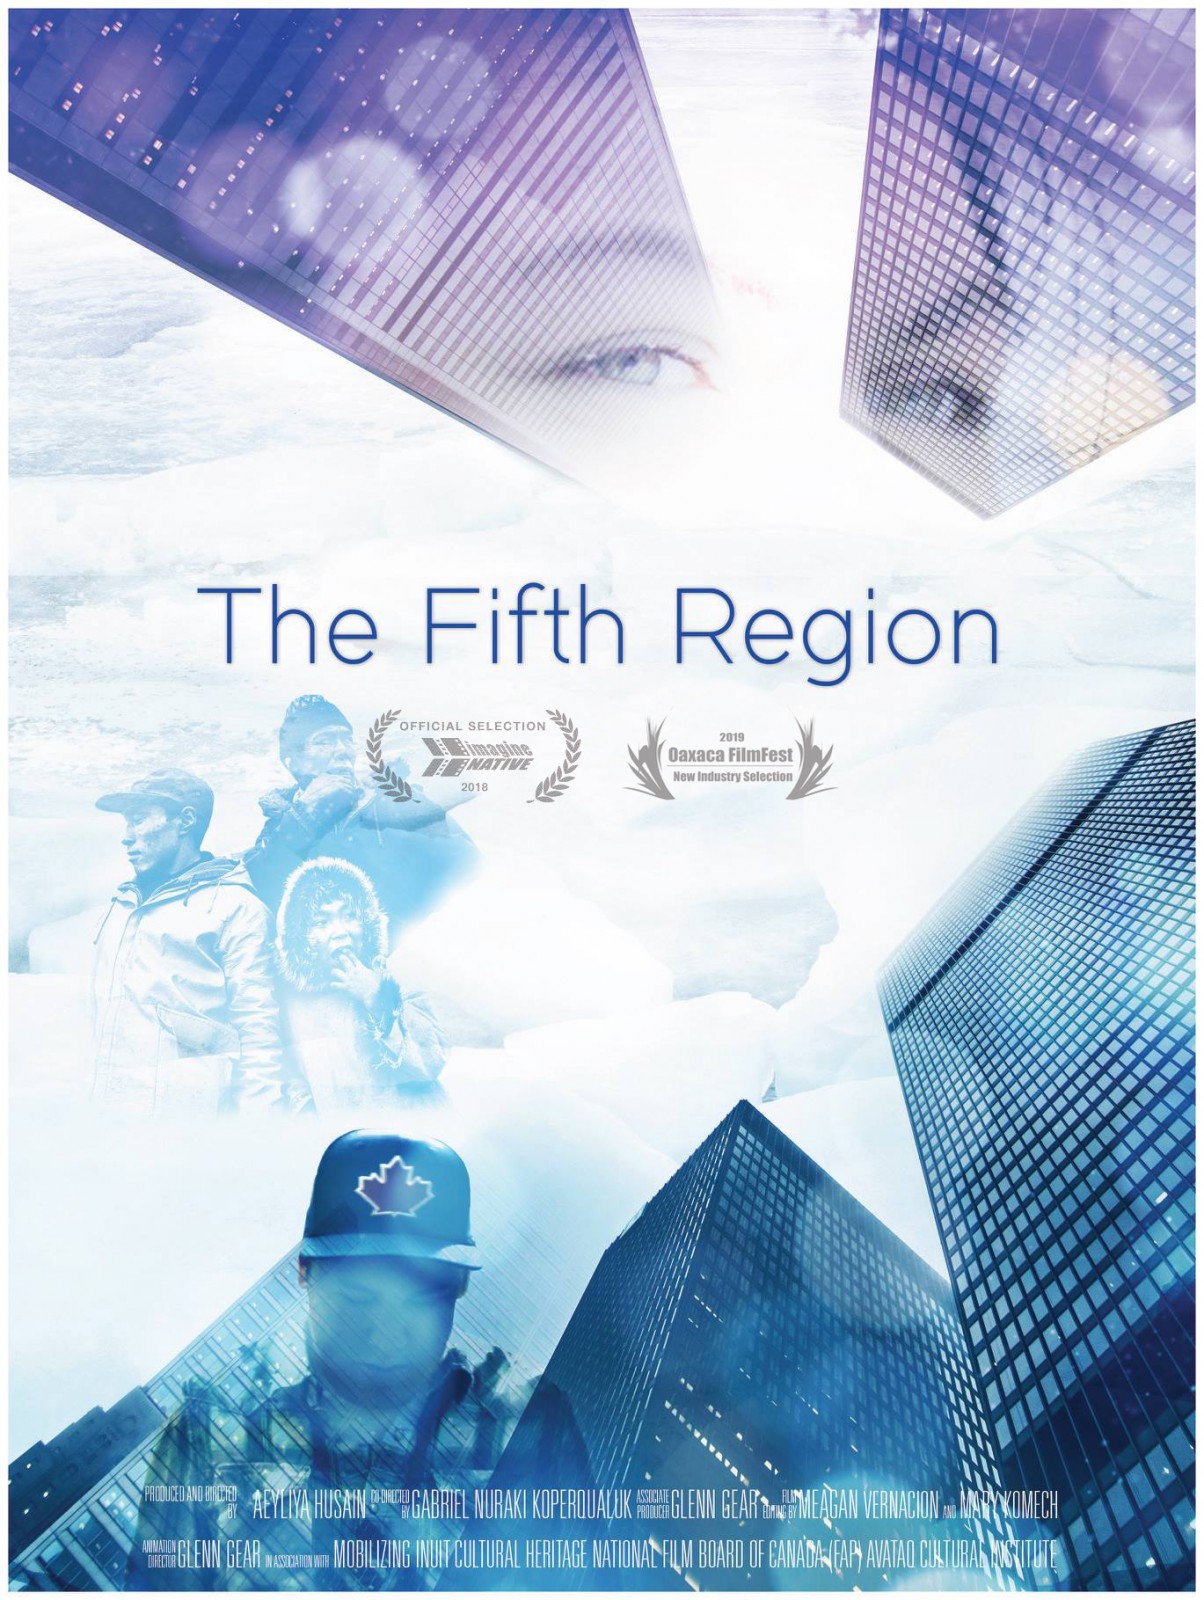 The Fifth Region poster